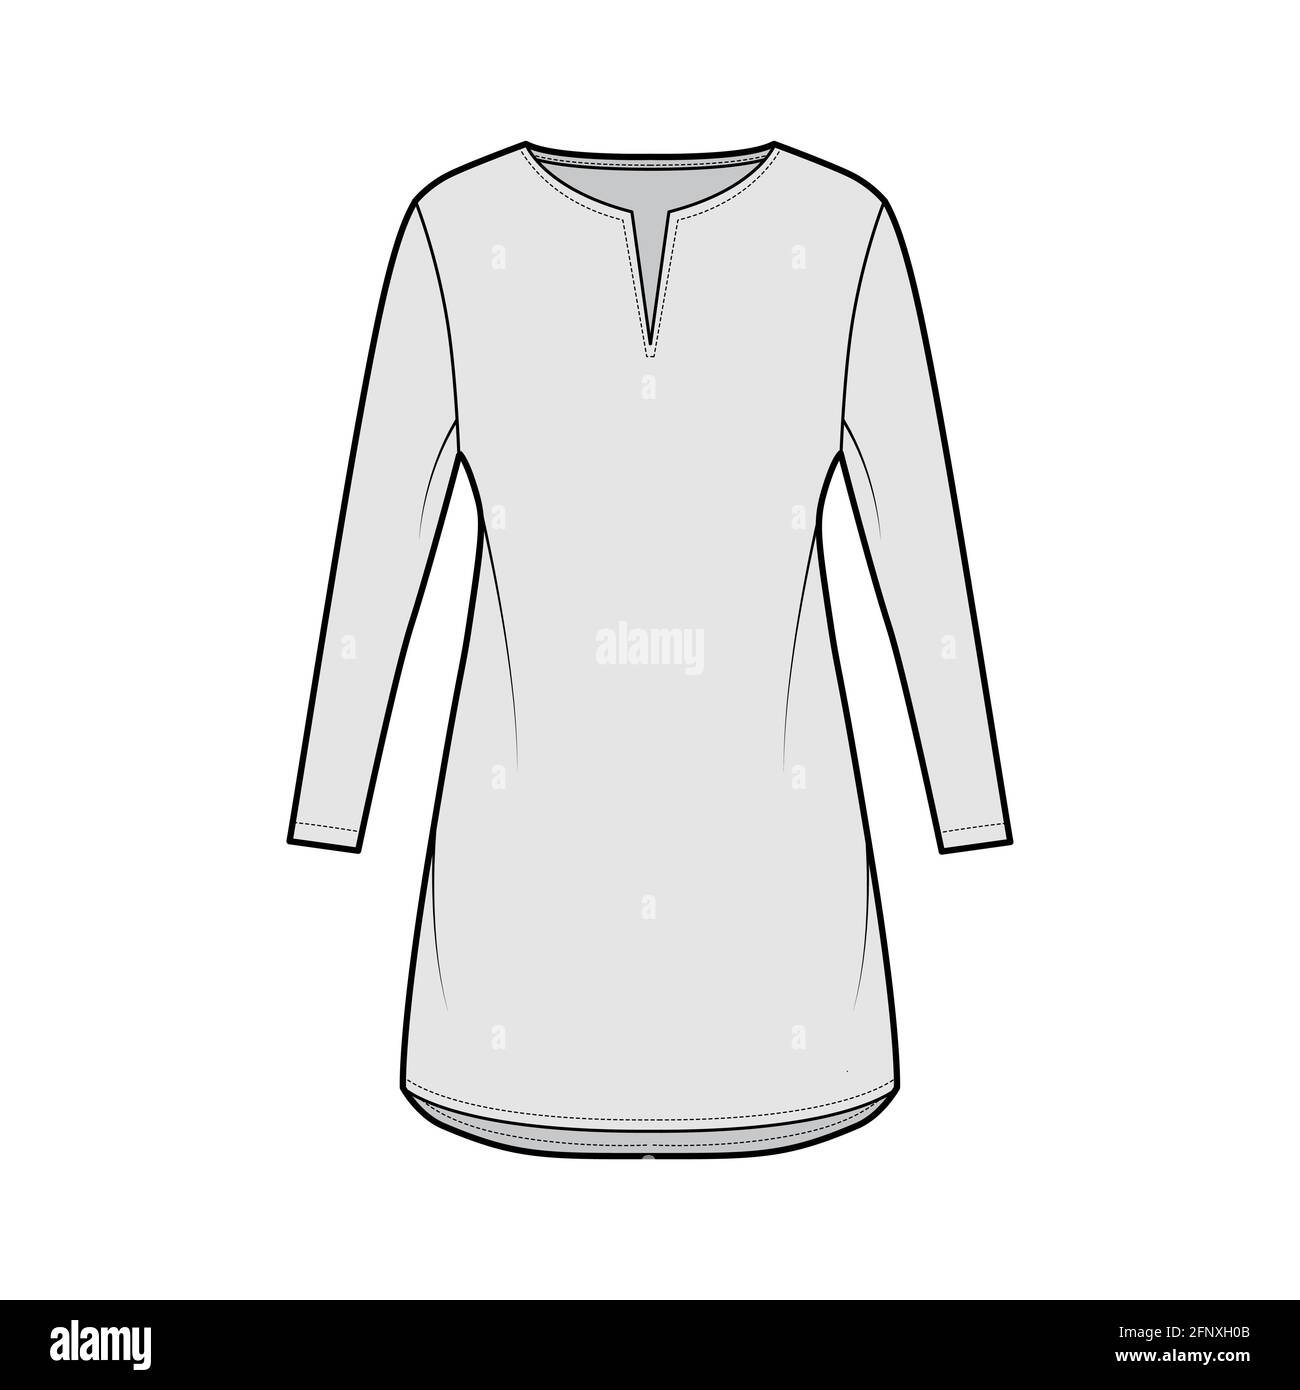 Dress tunic technical fashion illustration with long sleeves, oversized body, mini length skirt, slashed neck. Flat apparel front, grey color style. Women, men unisex CAD mockup Stock Vector